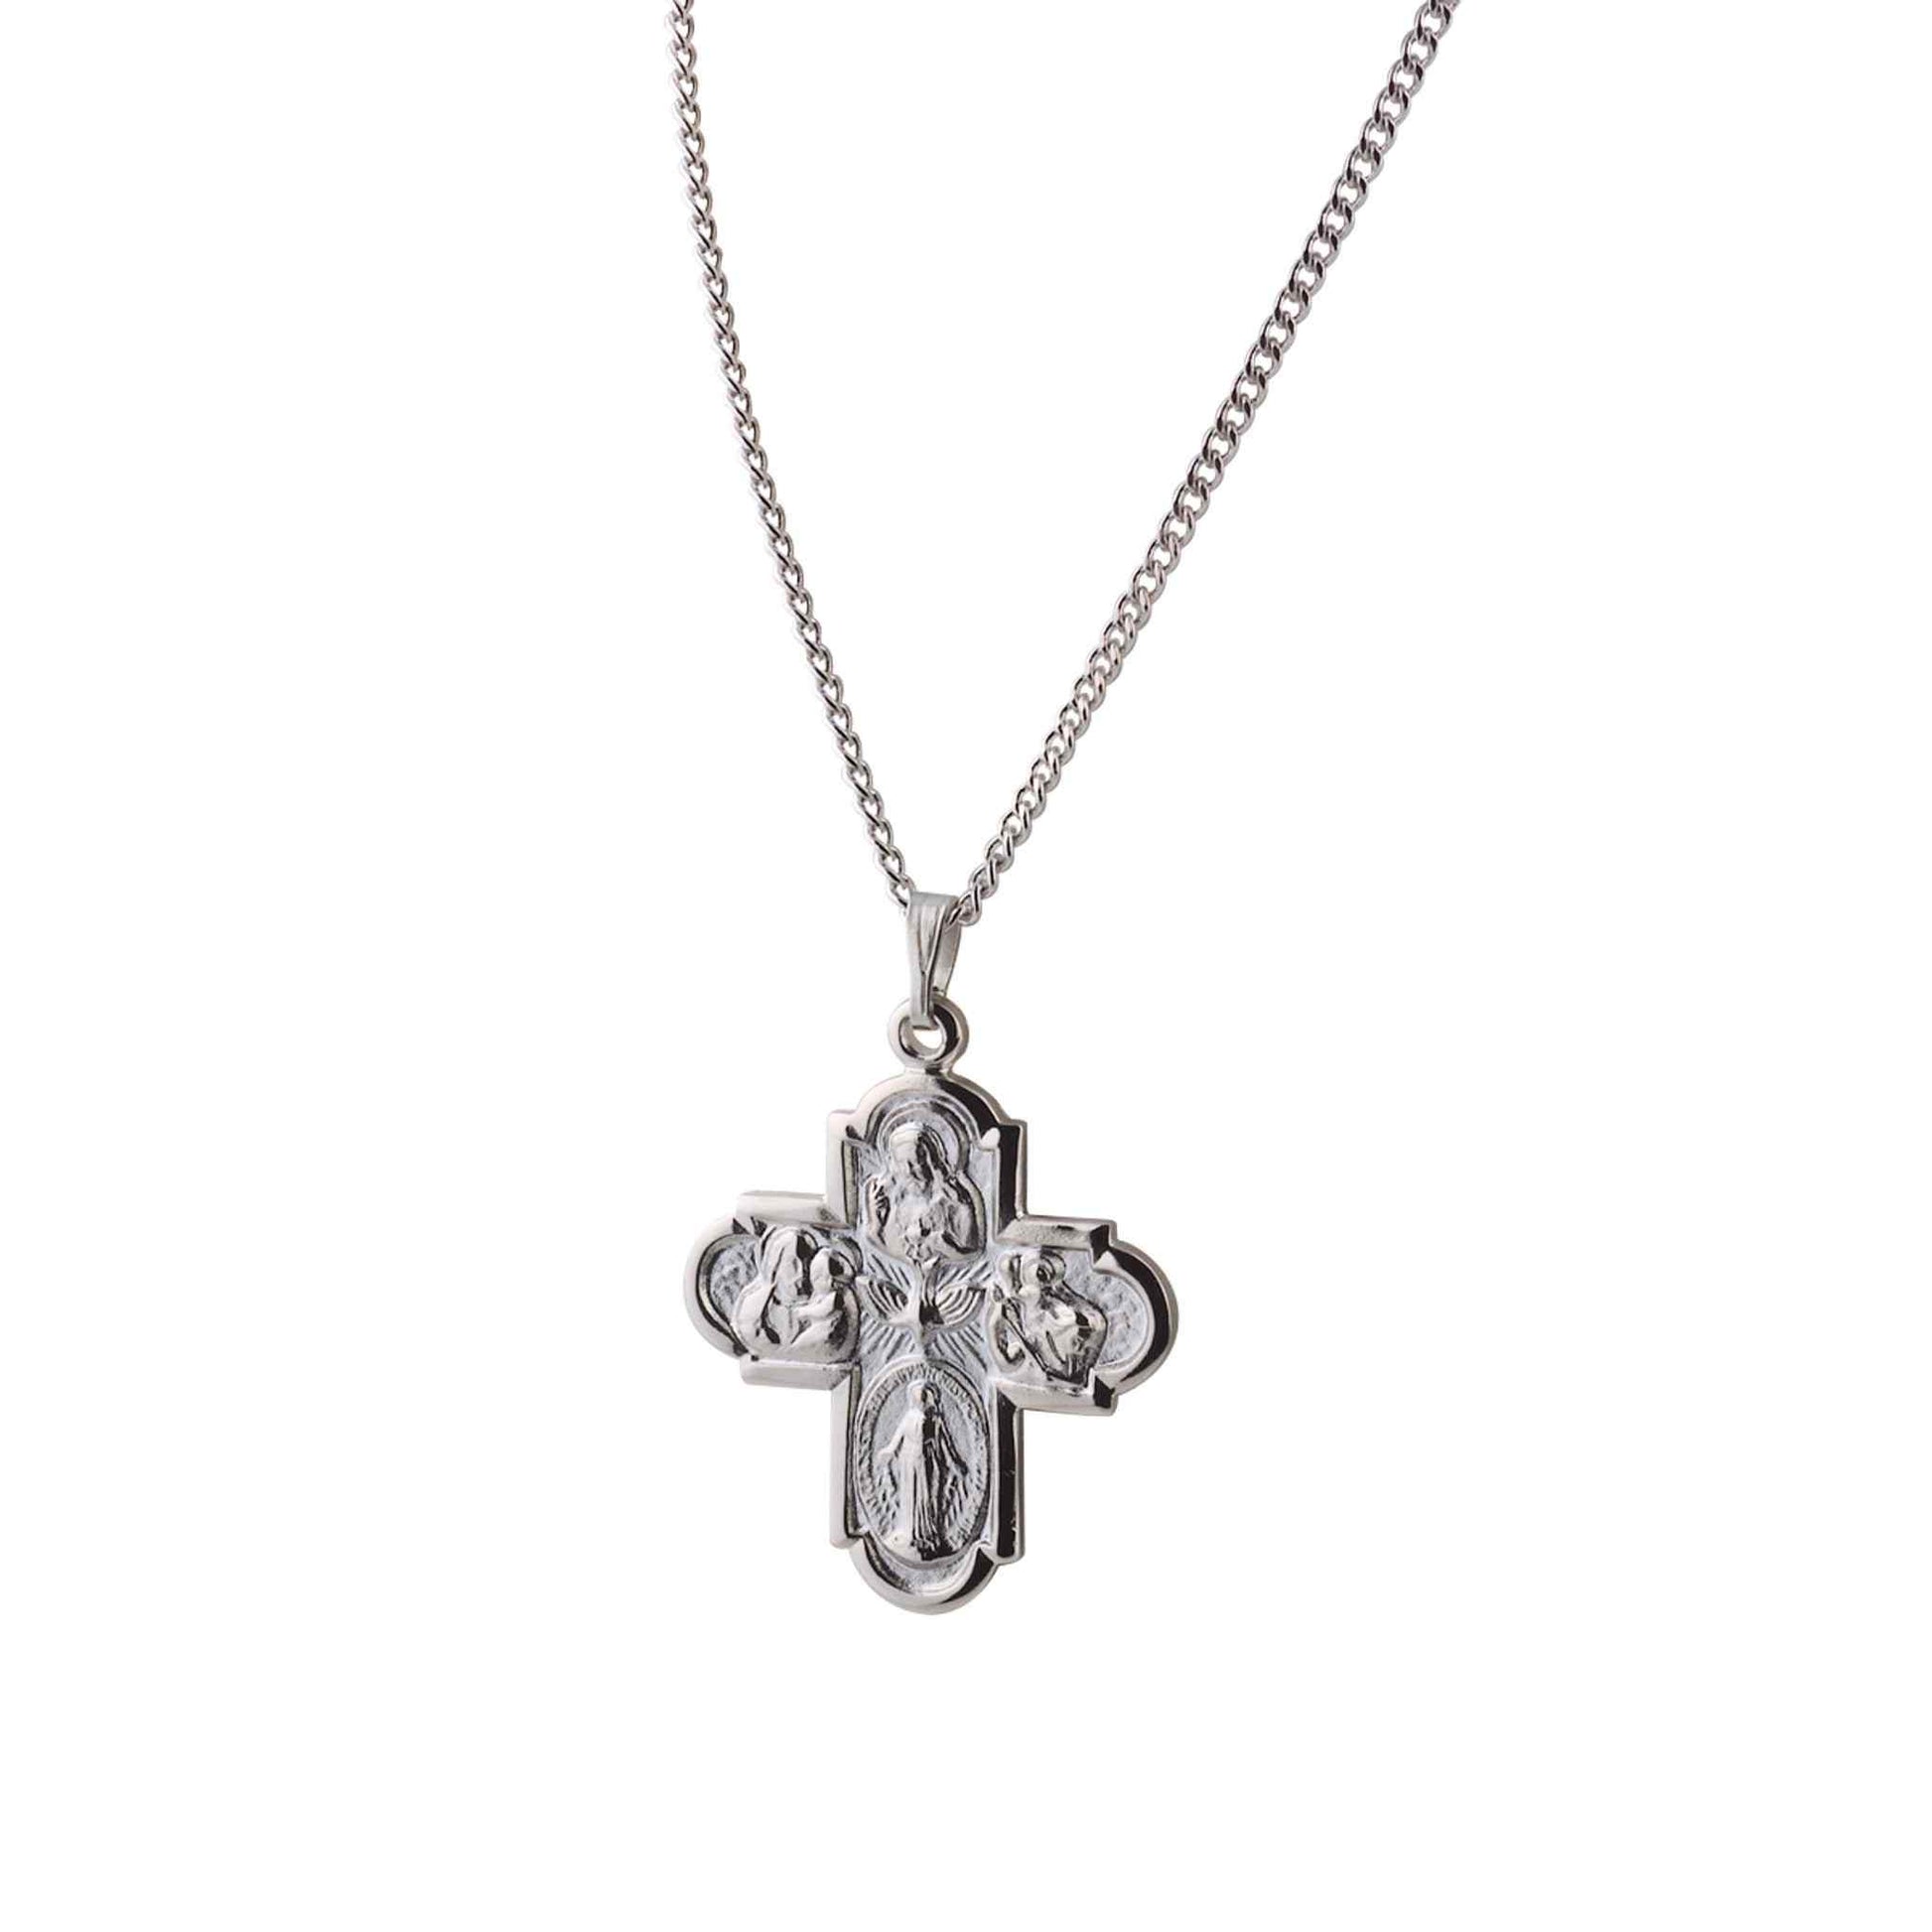 A four way cross necklace displayed on a neutral white background.